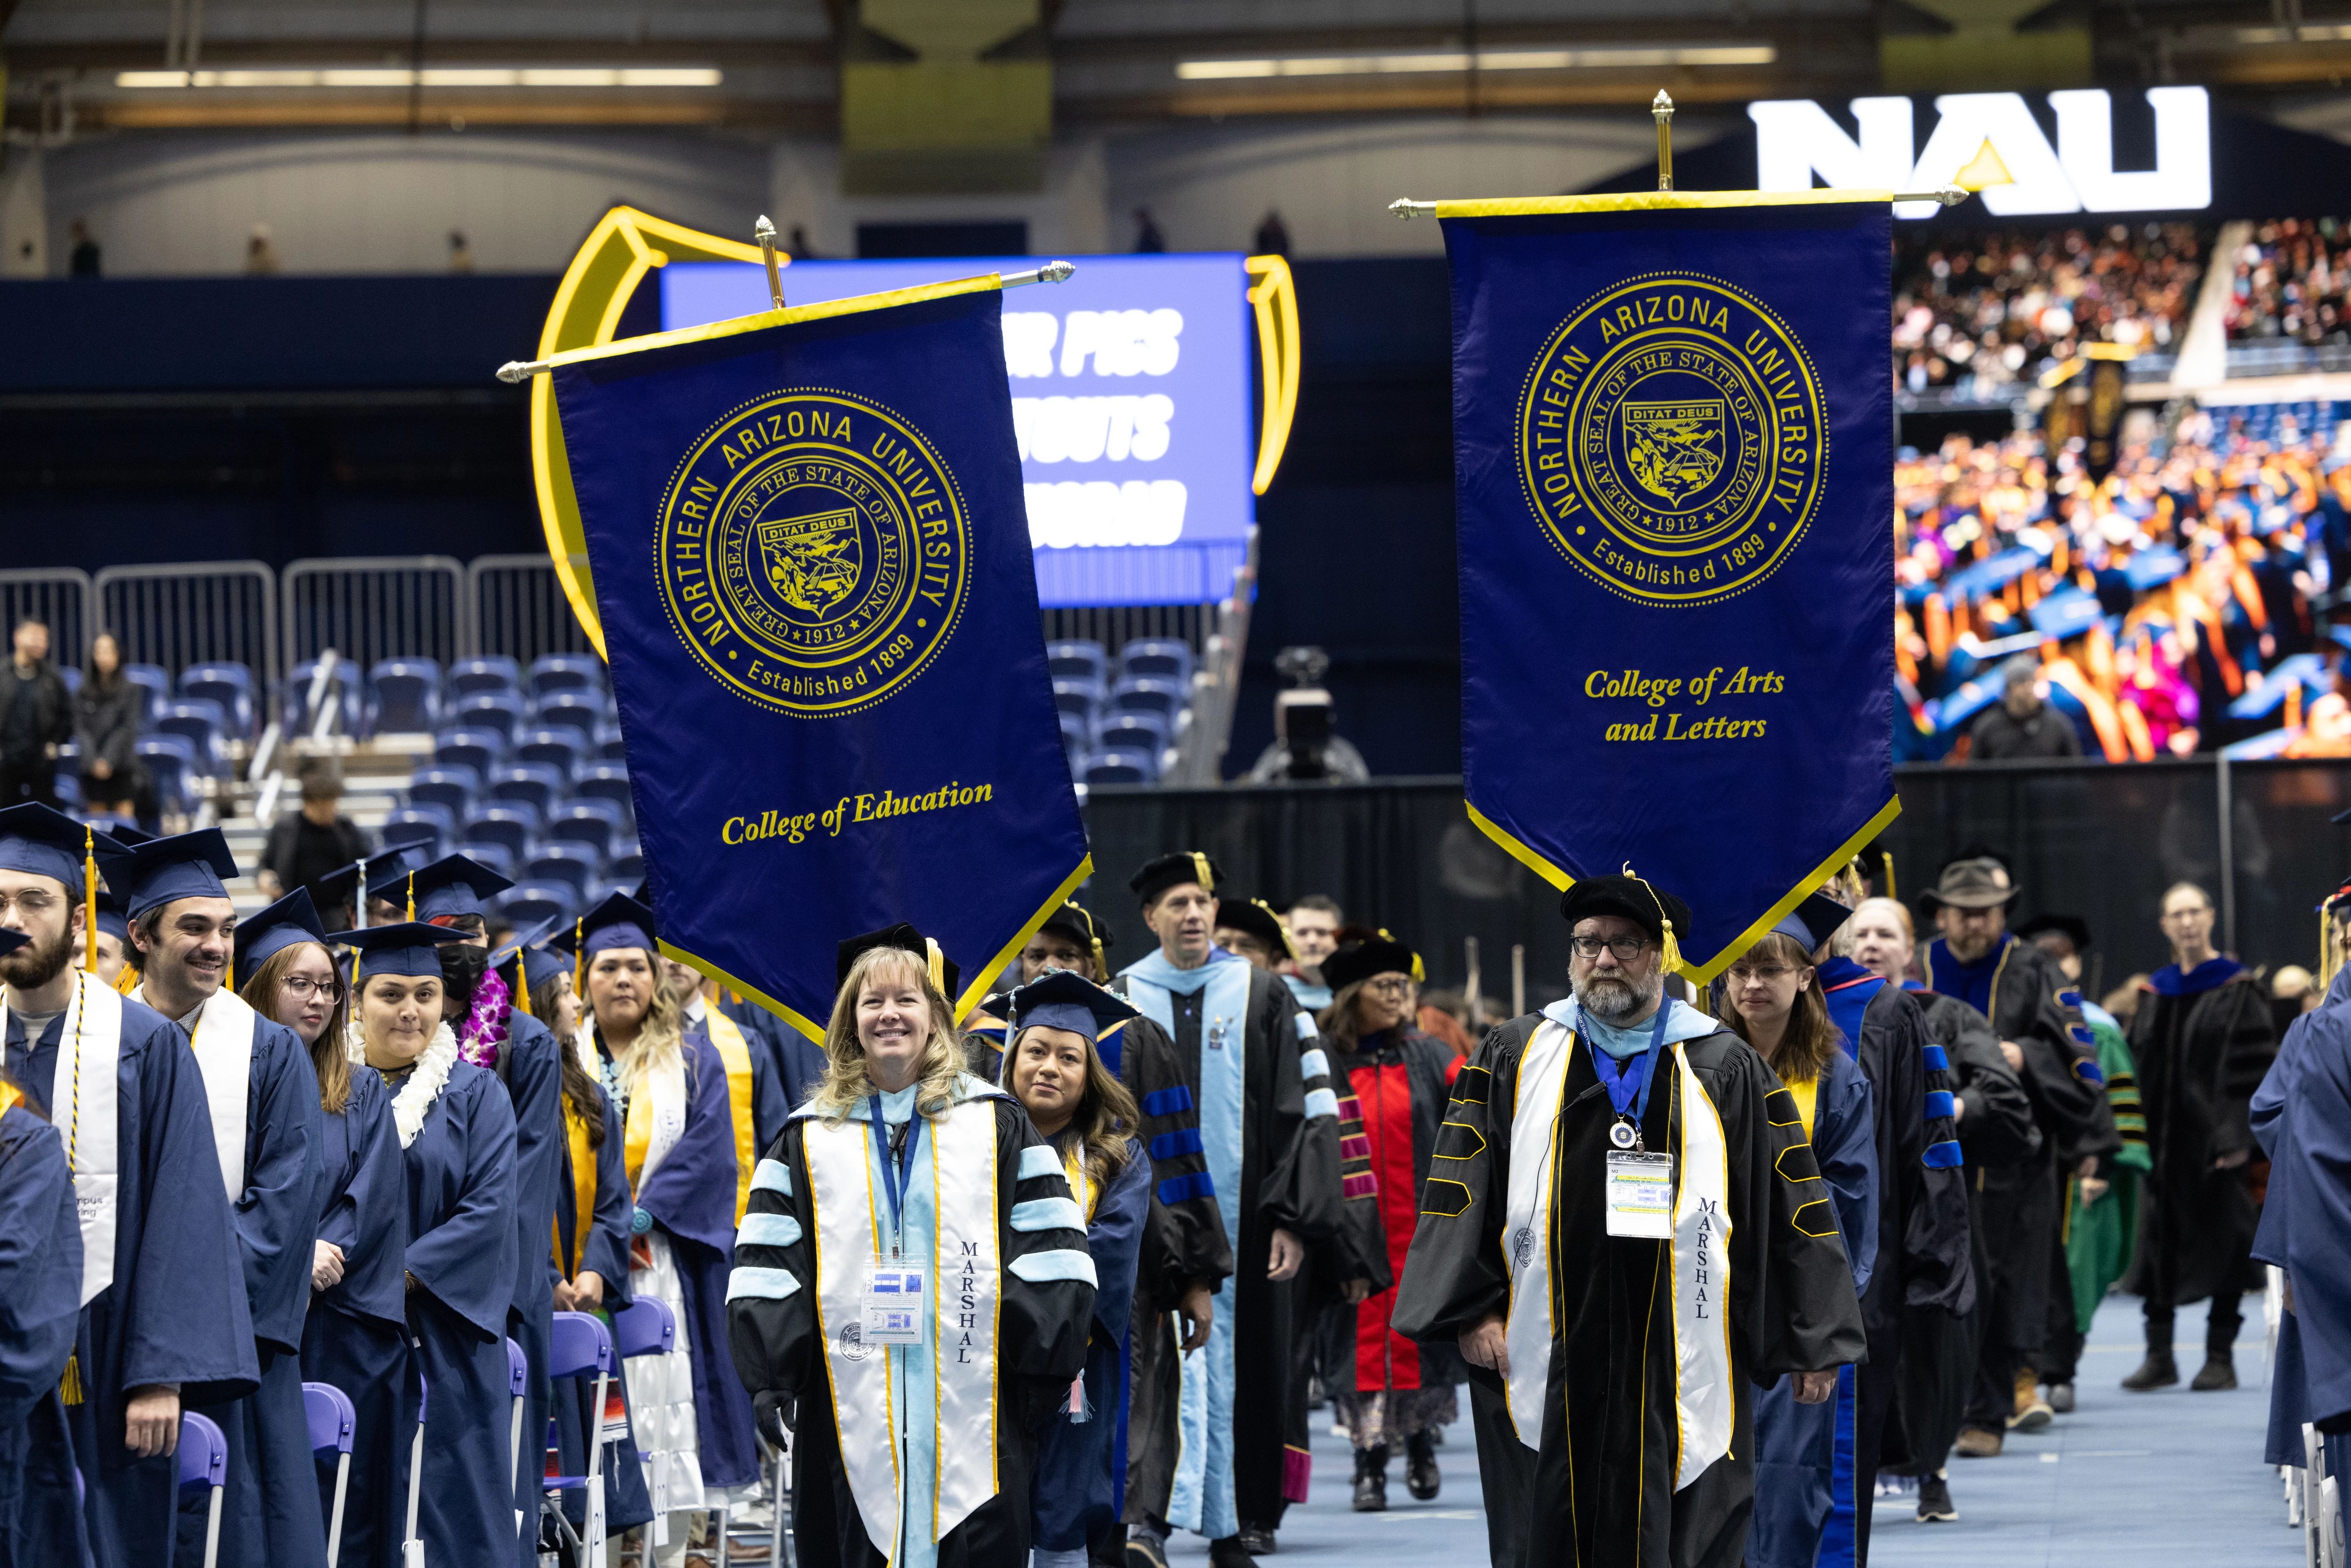 Faculty holding banners during commencement.